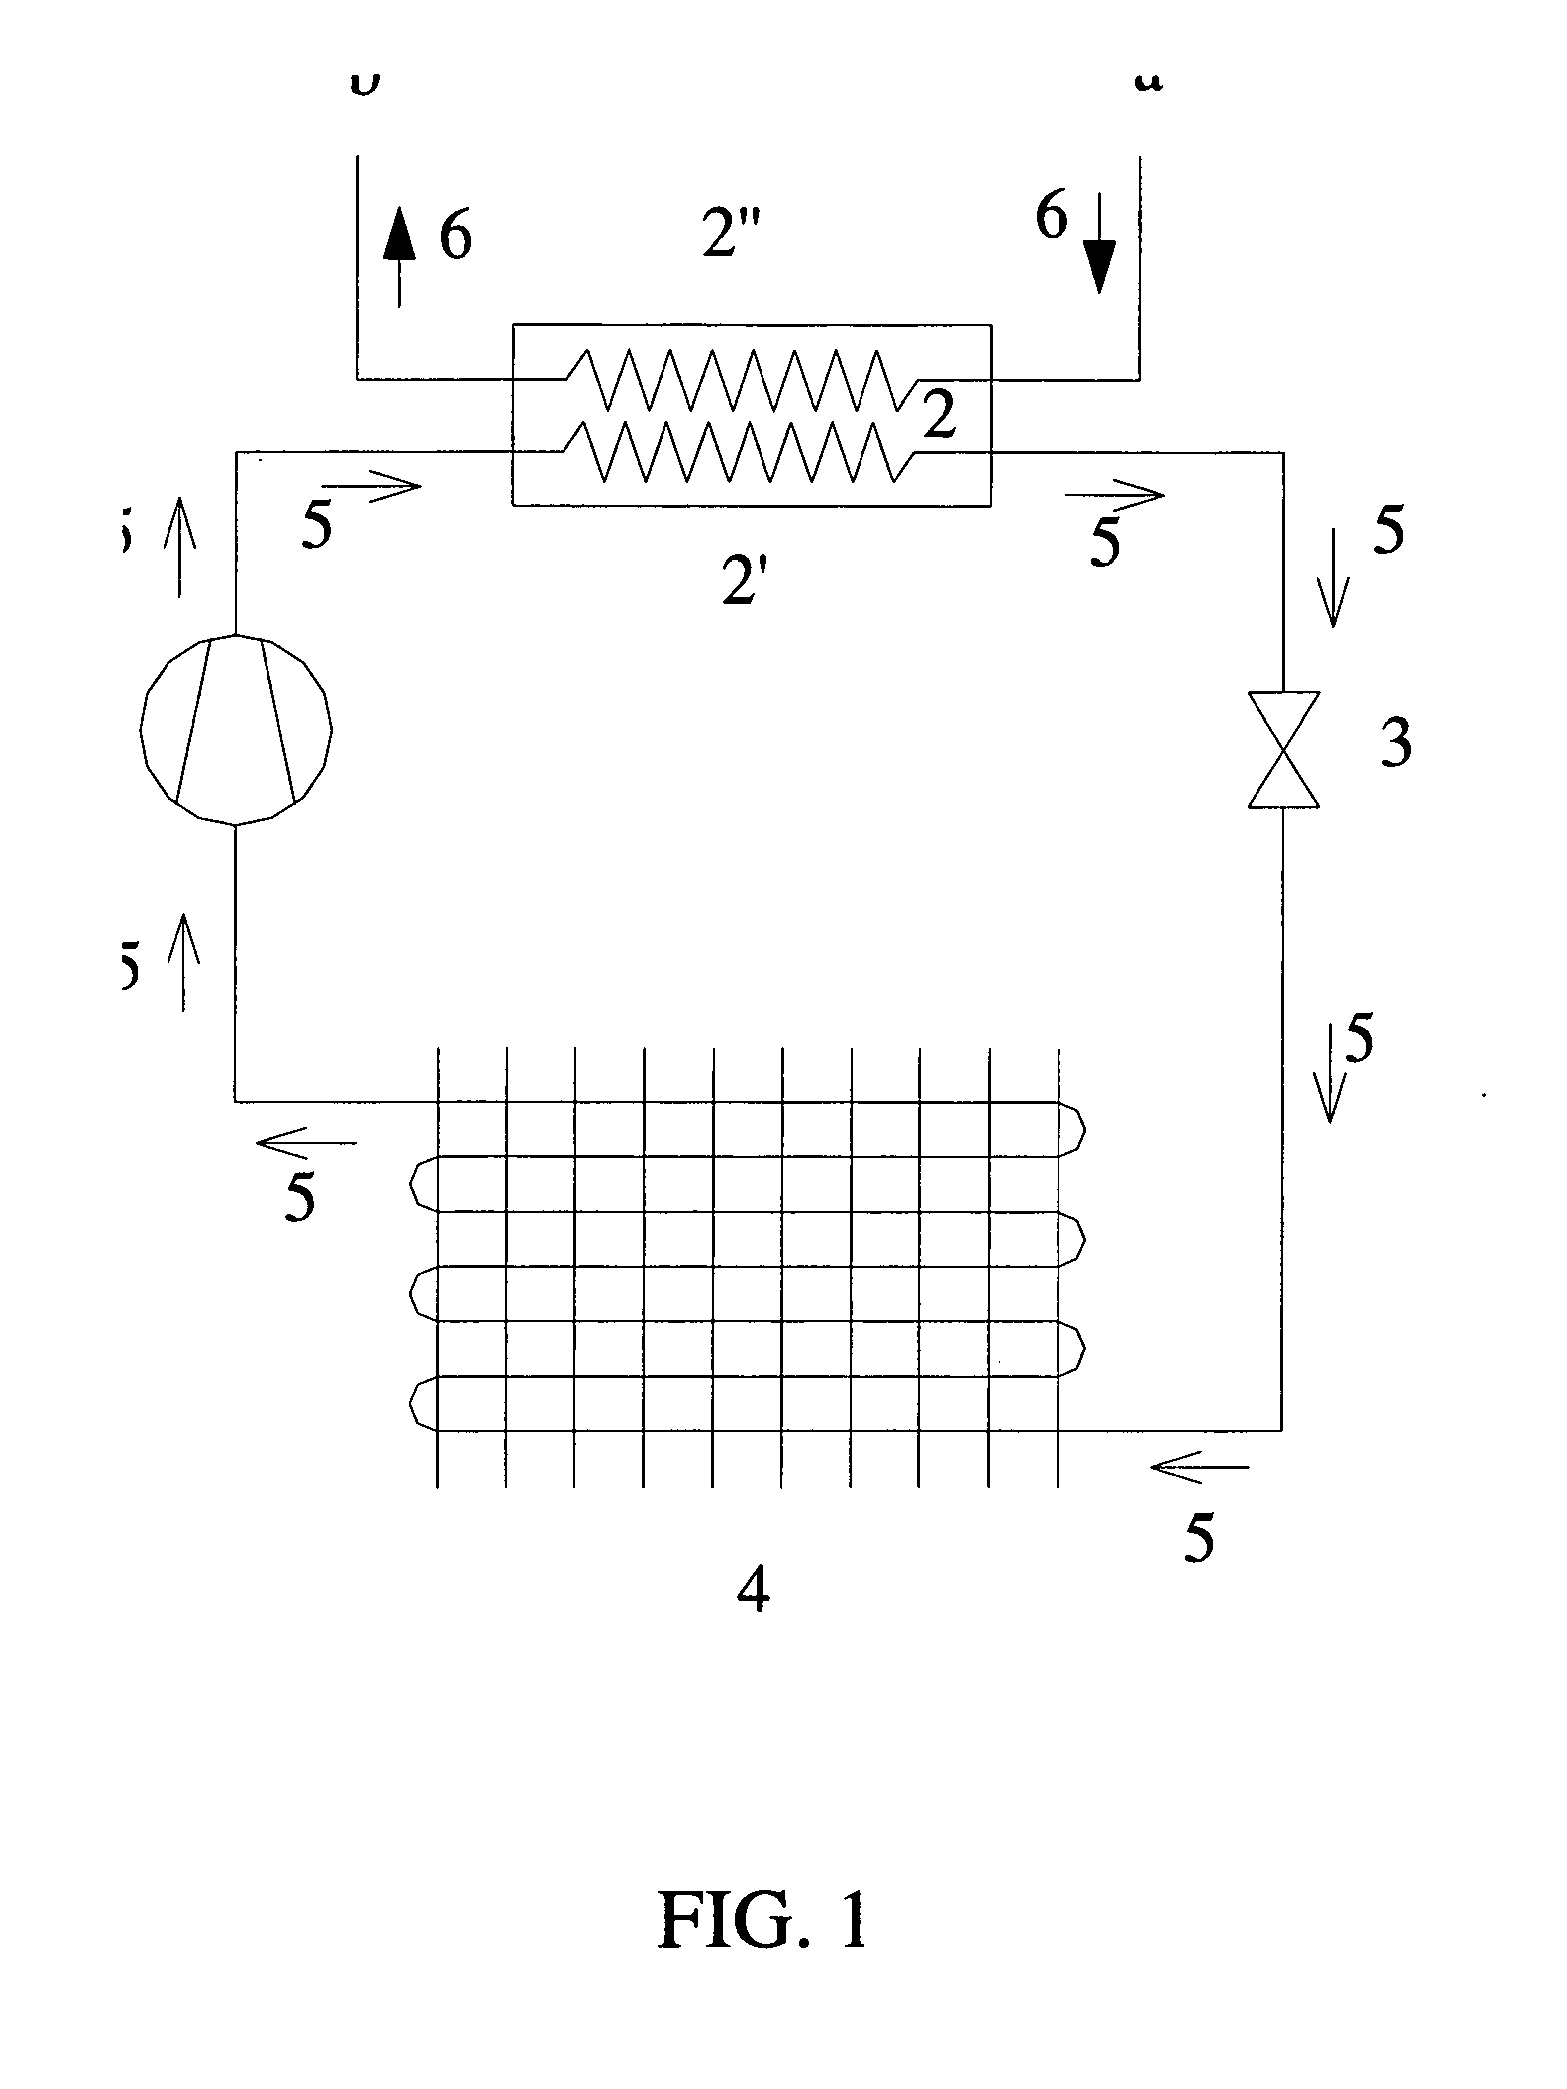 Hydrofluorocarbon refrigerant compositions for heat pump water heaters